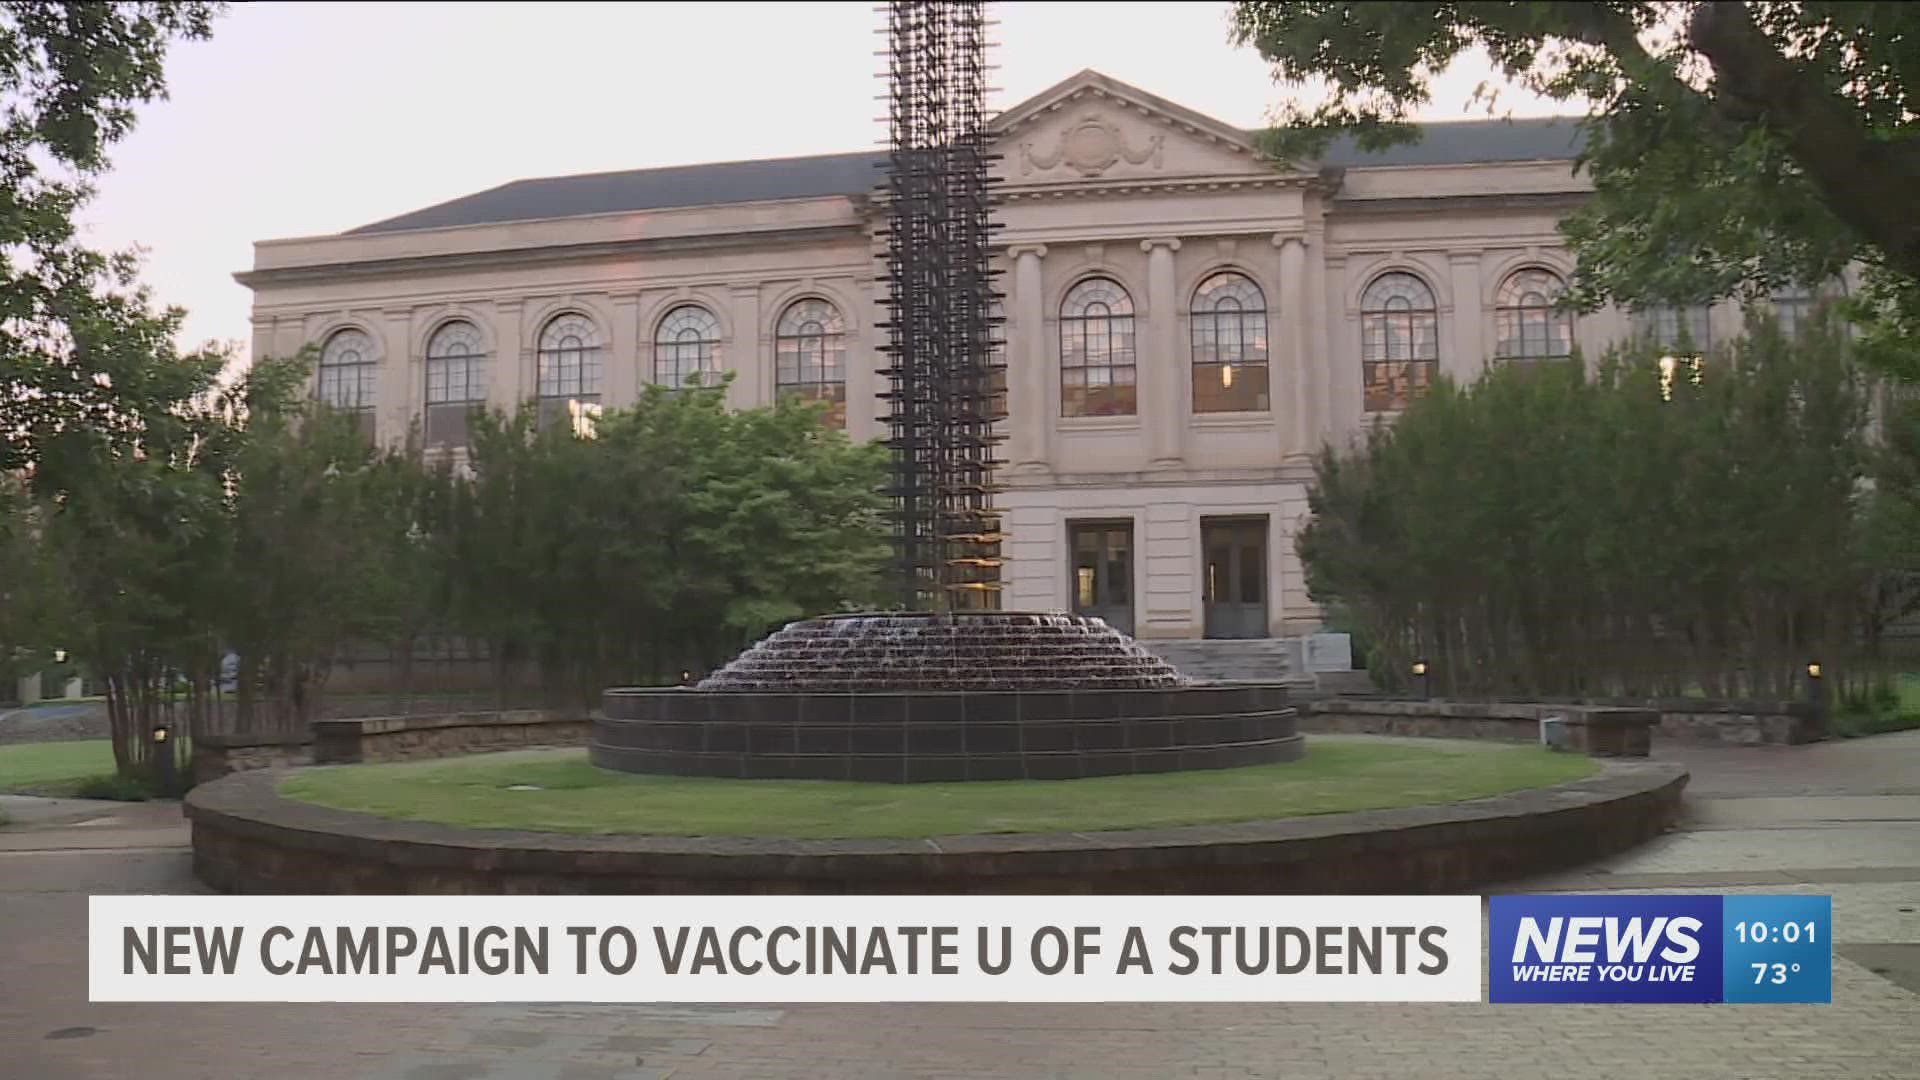 The University of Arkansas possibly offering vaccine incentives to students as COVID cases rise, while students combat the spread of misinformation on social media.